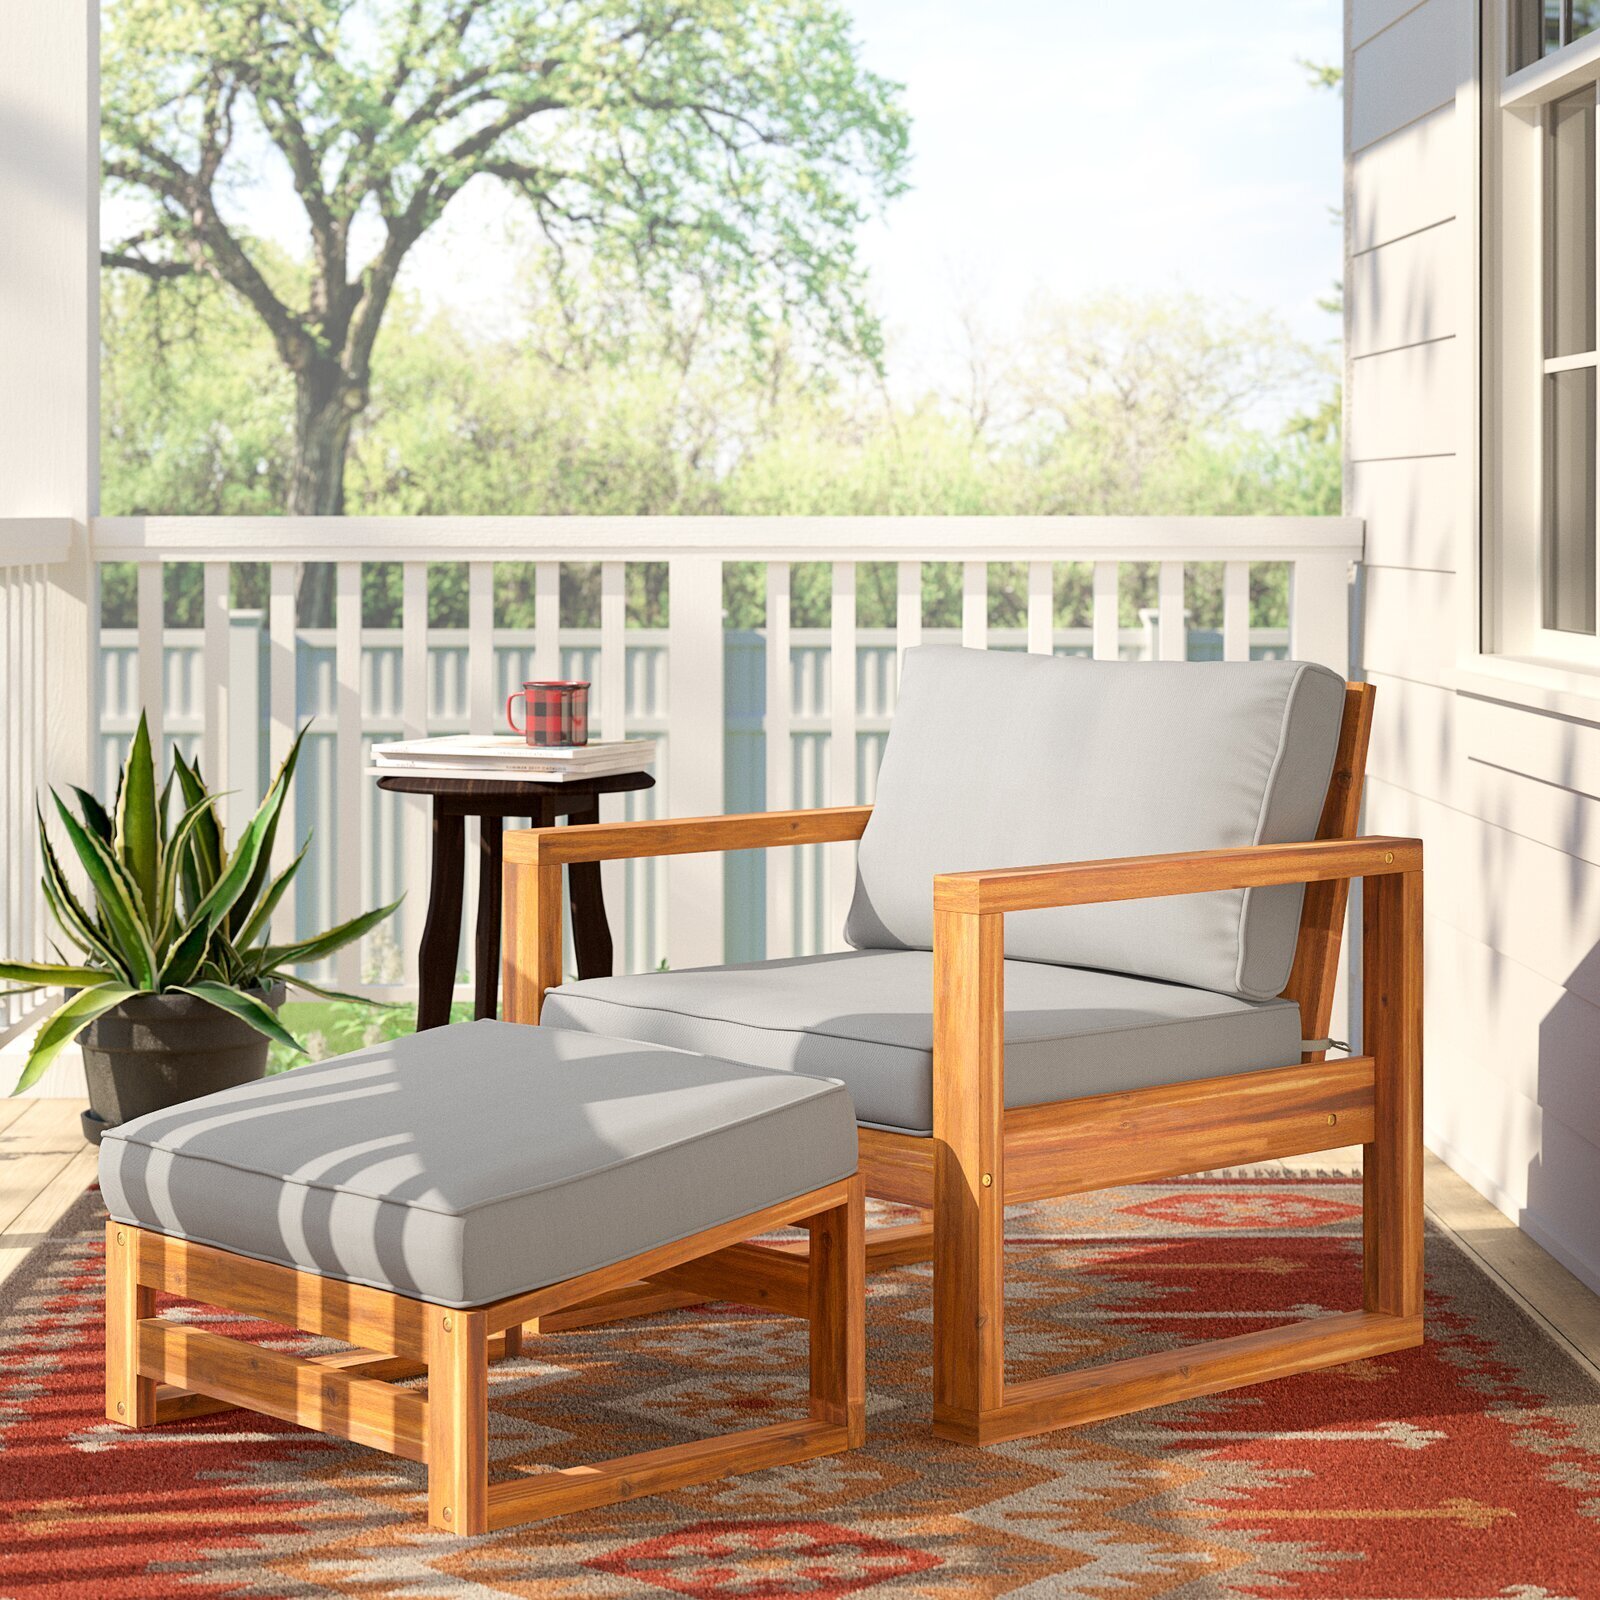 Wooden patio chair with ottoman and cushions